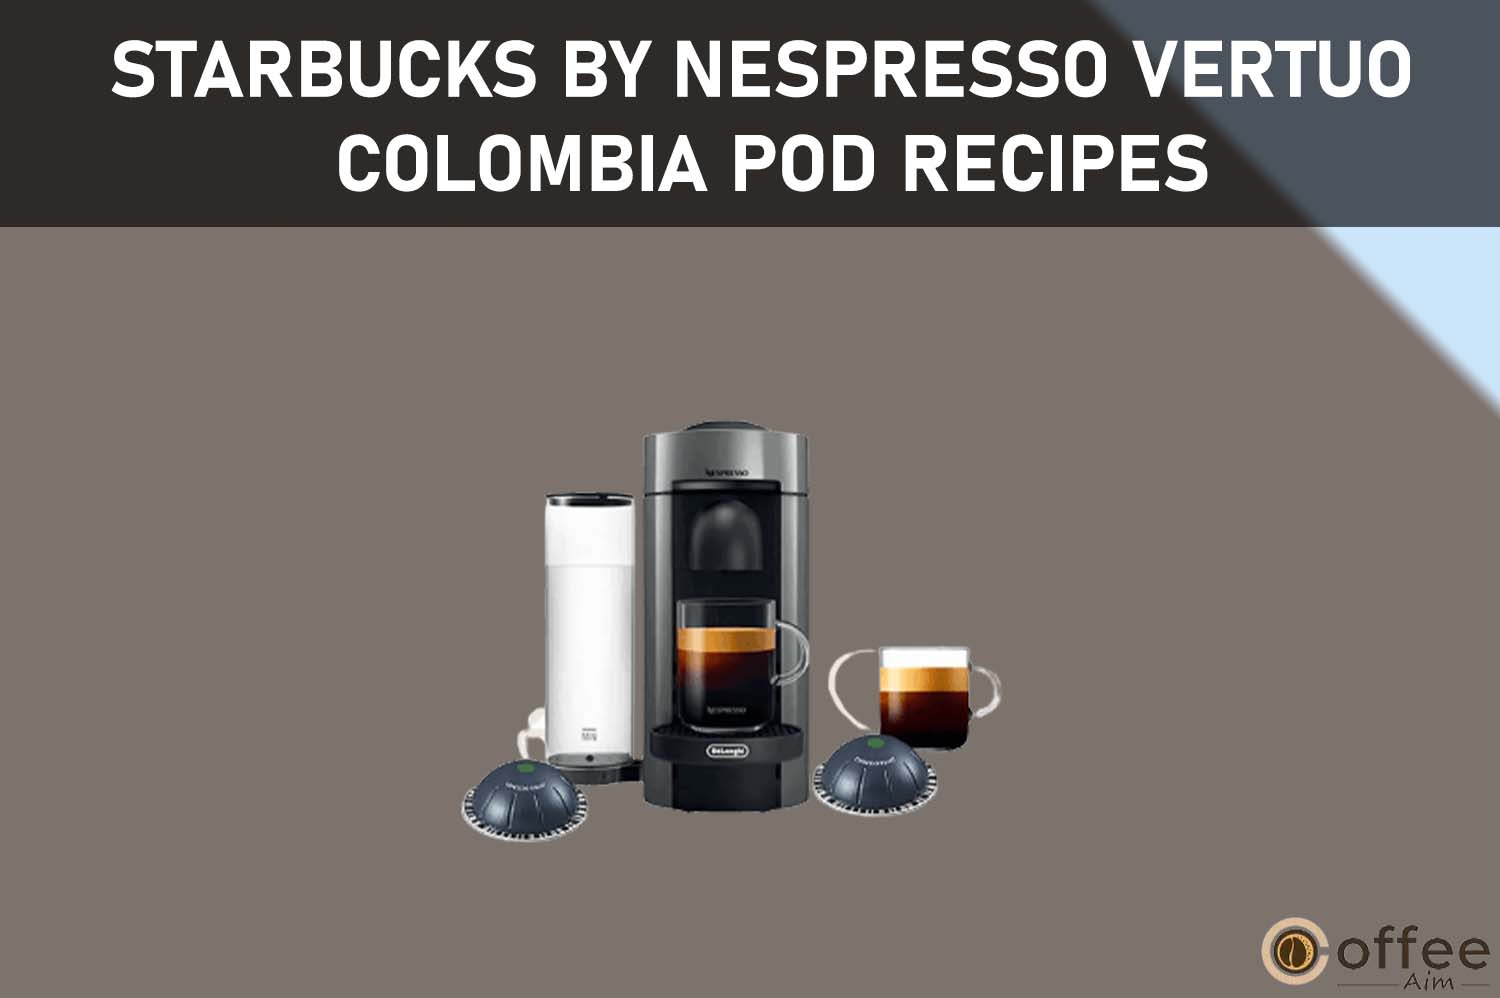 Featured image for the article "Starbucks by Nespresso Vertuo Colombia Pod Recipes"